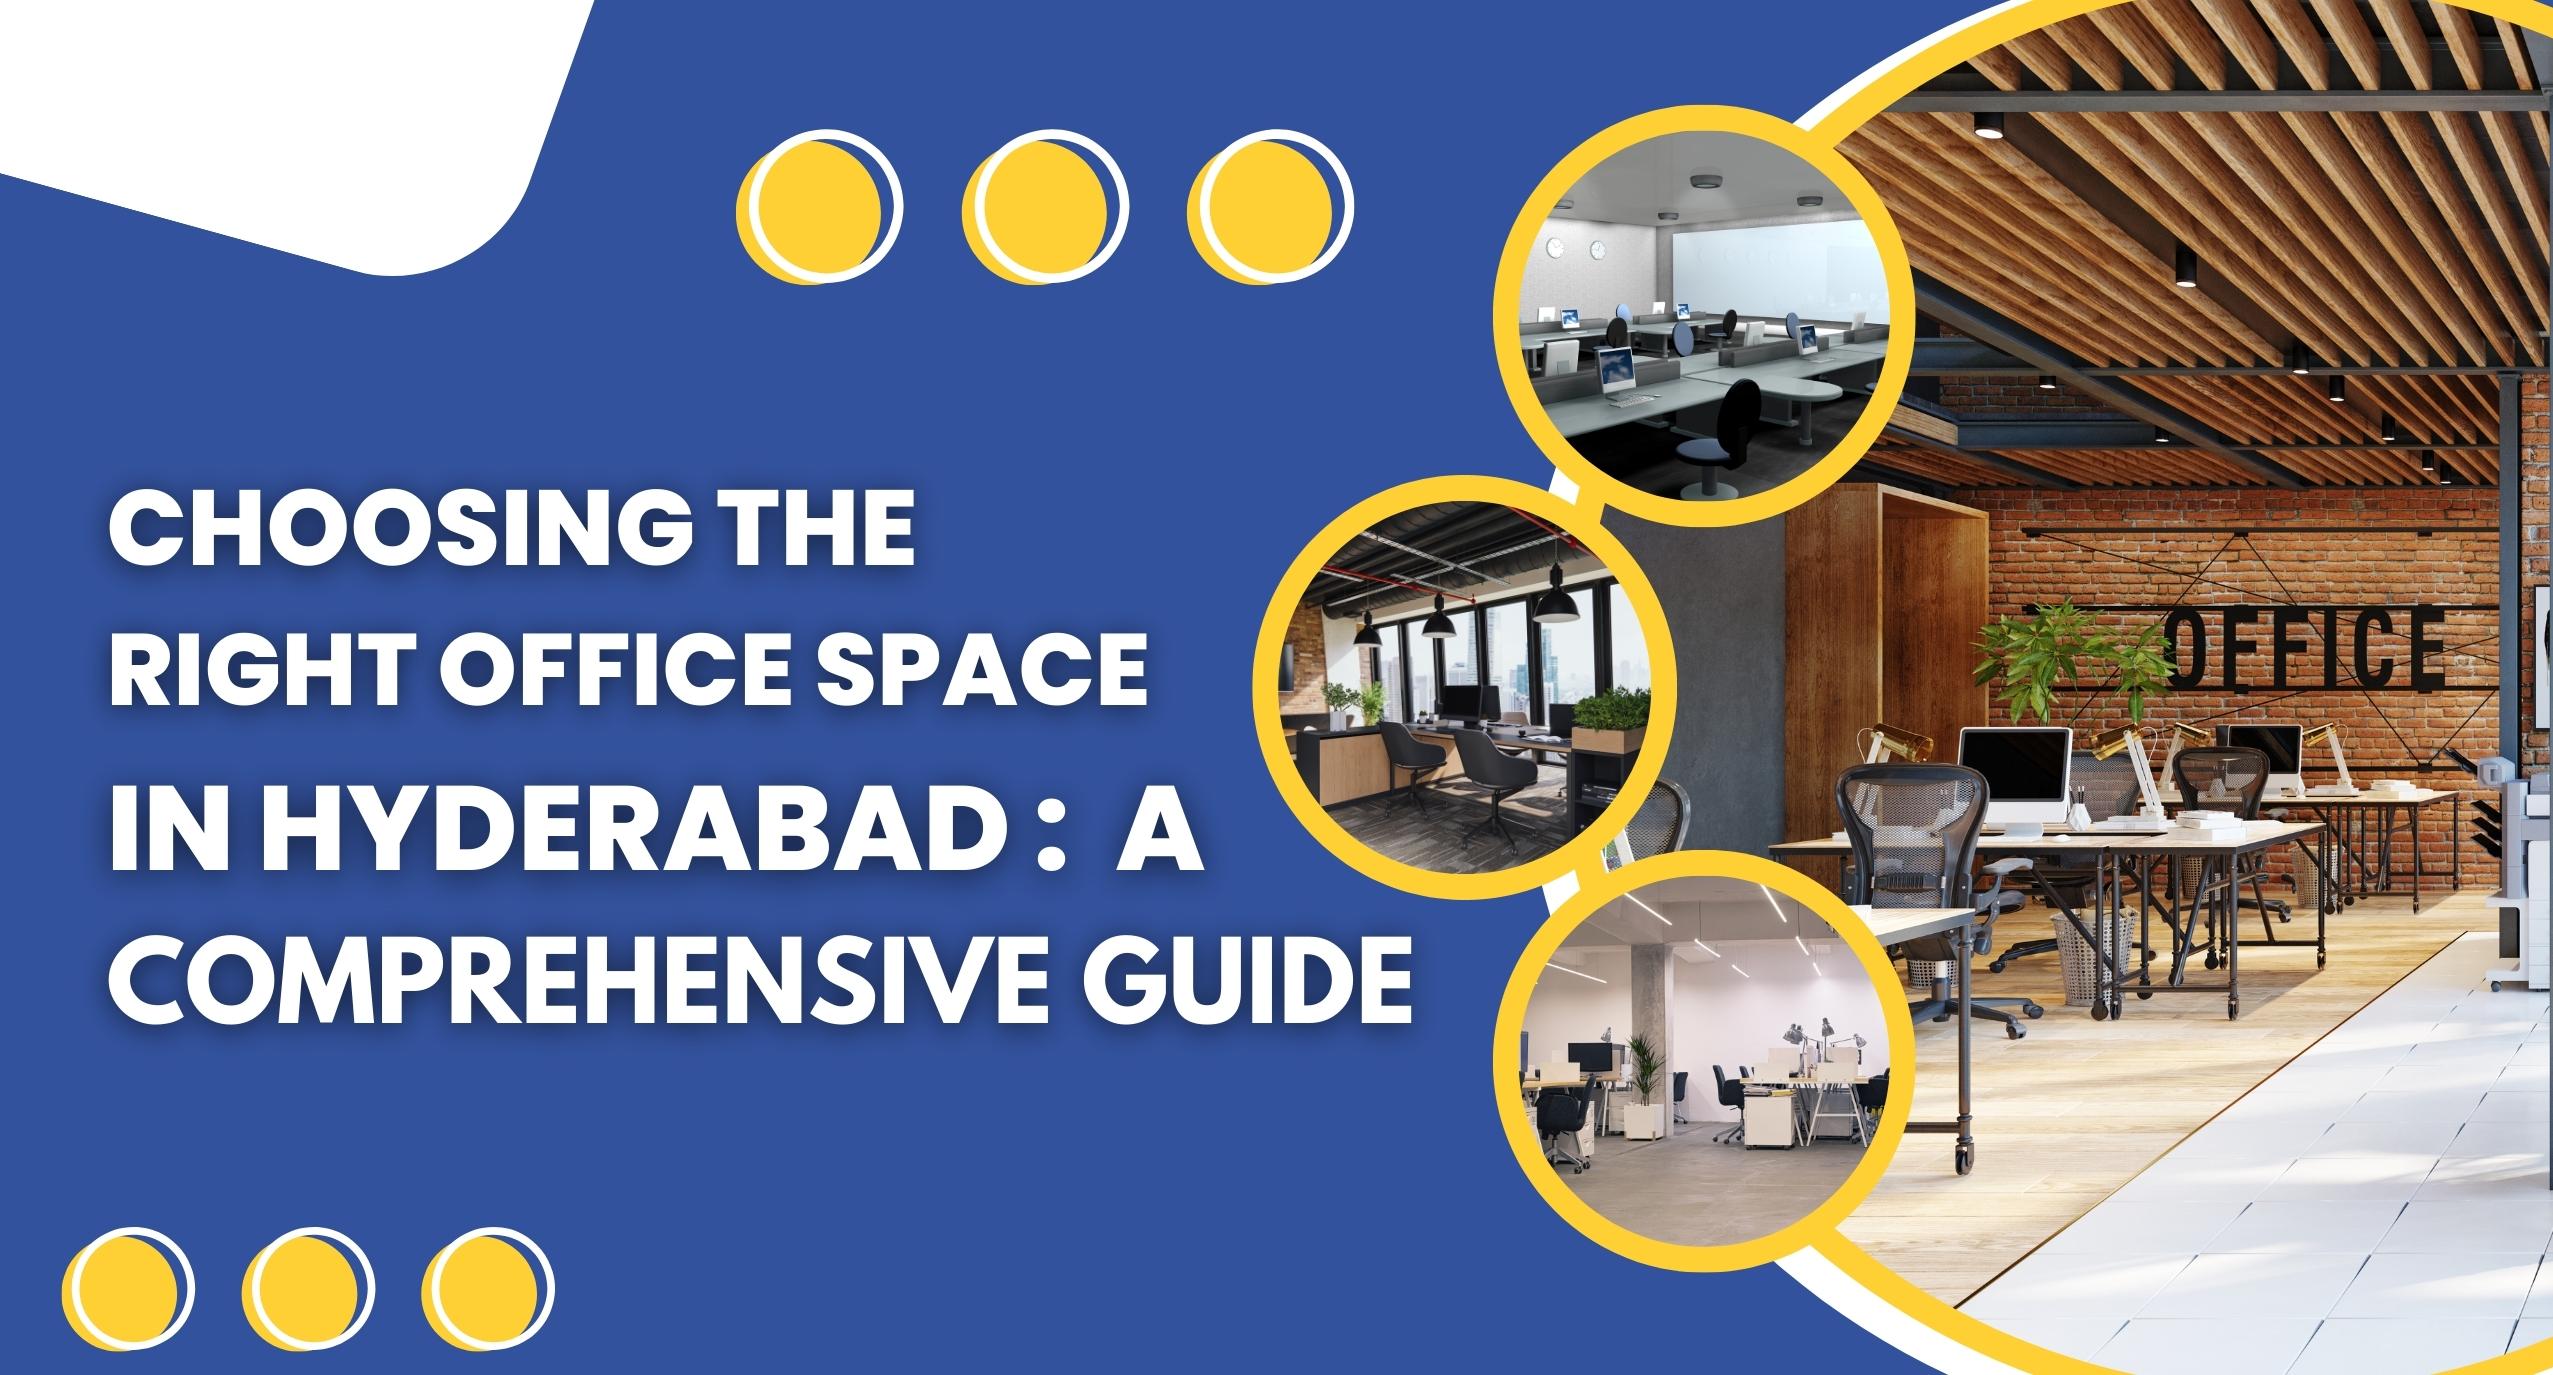 Choosing the Right Office Space in Hyderabad: A Comprehensive Guide